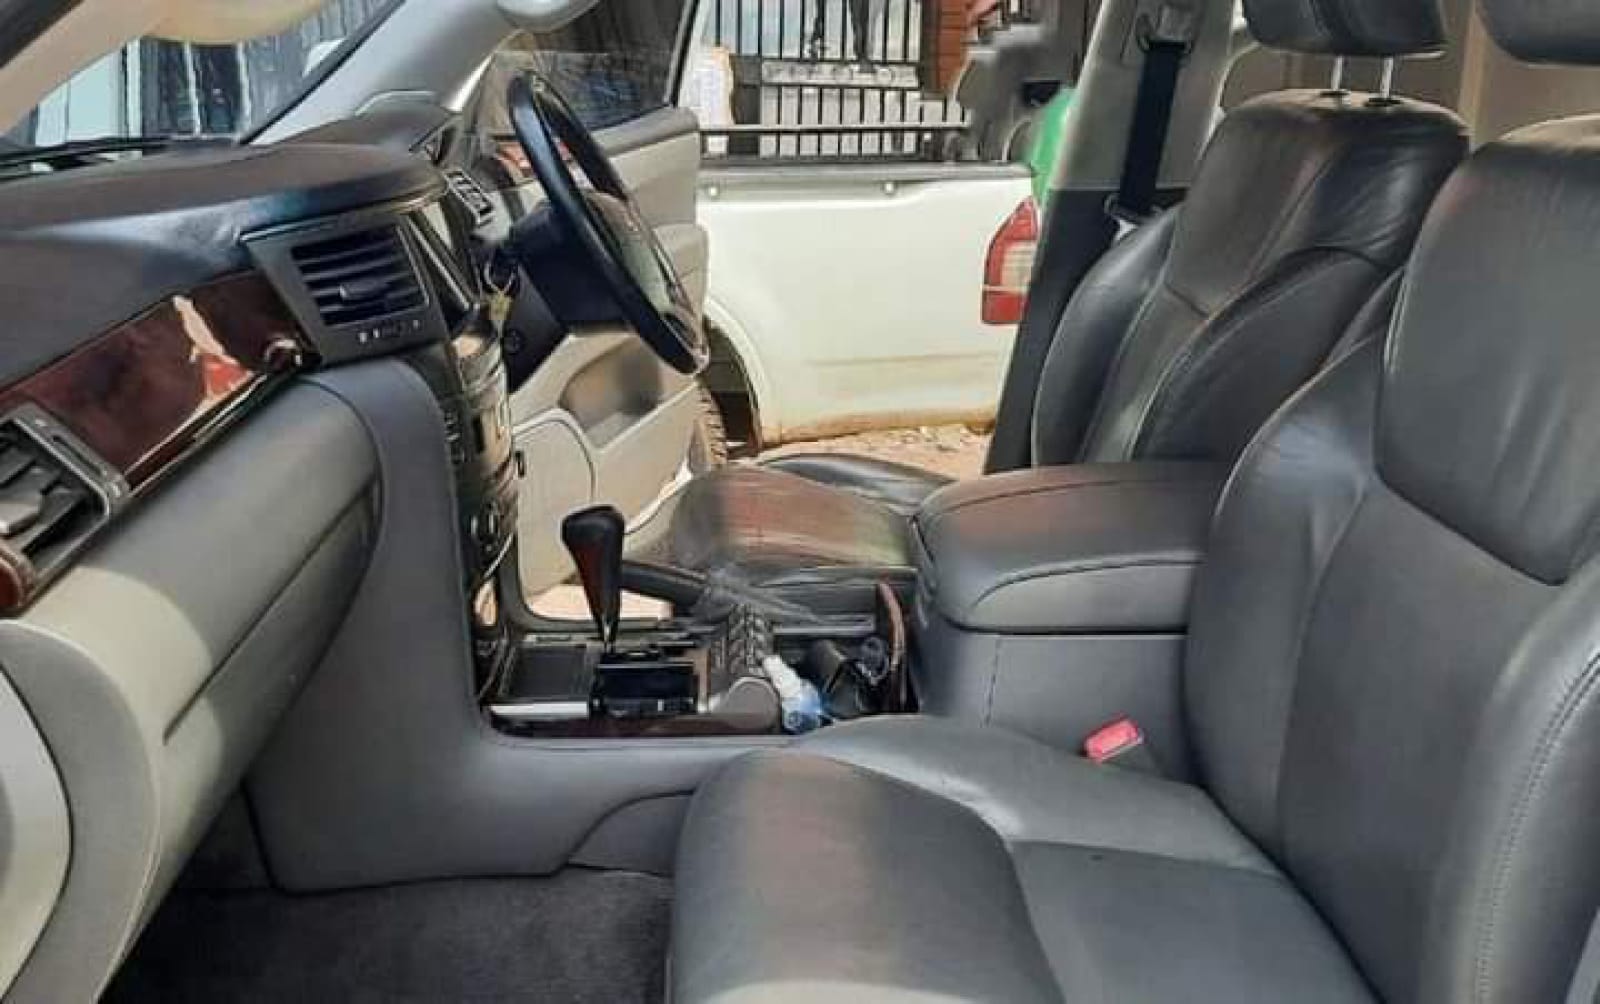 LEXUS LX 570 5M ONLY Fully Loaded HIRE PURCHASE OK EXCLUSIVE For SALE in Kenya